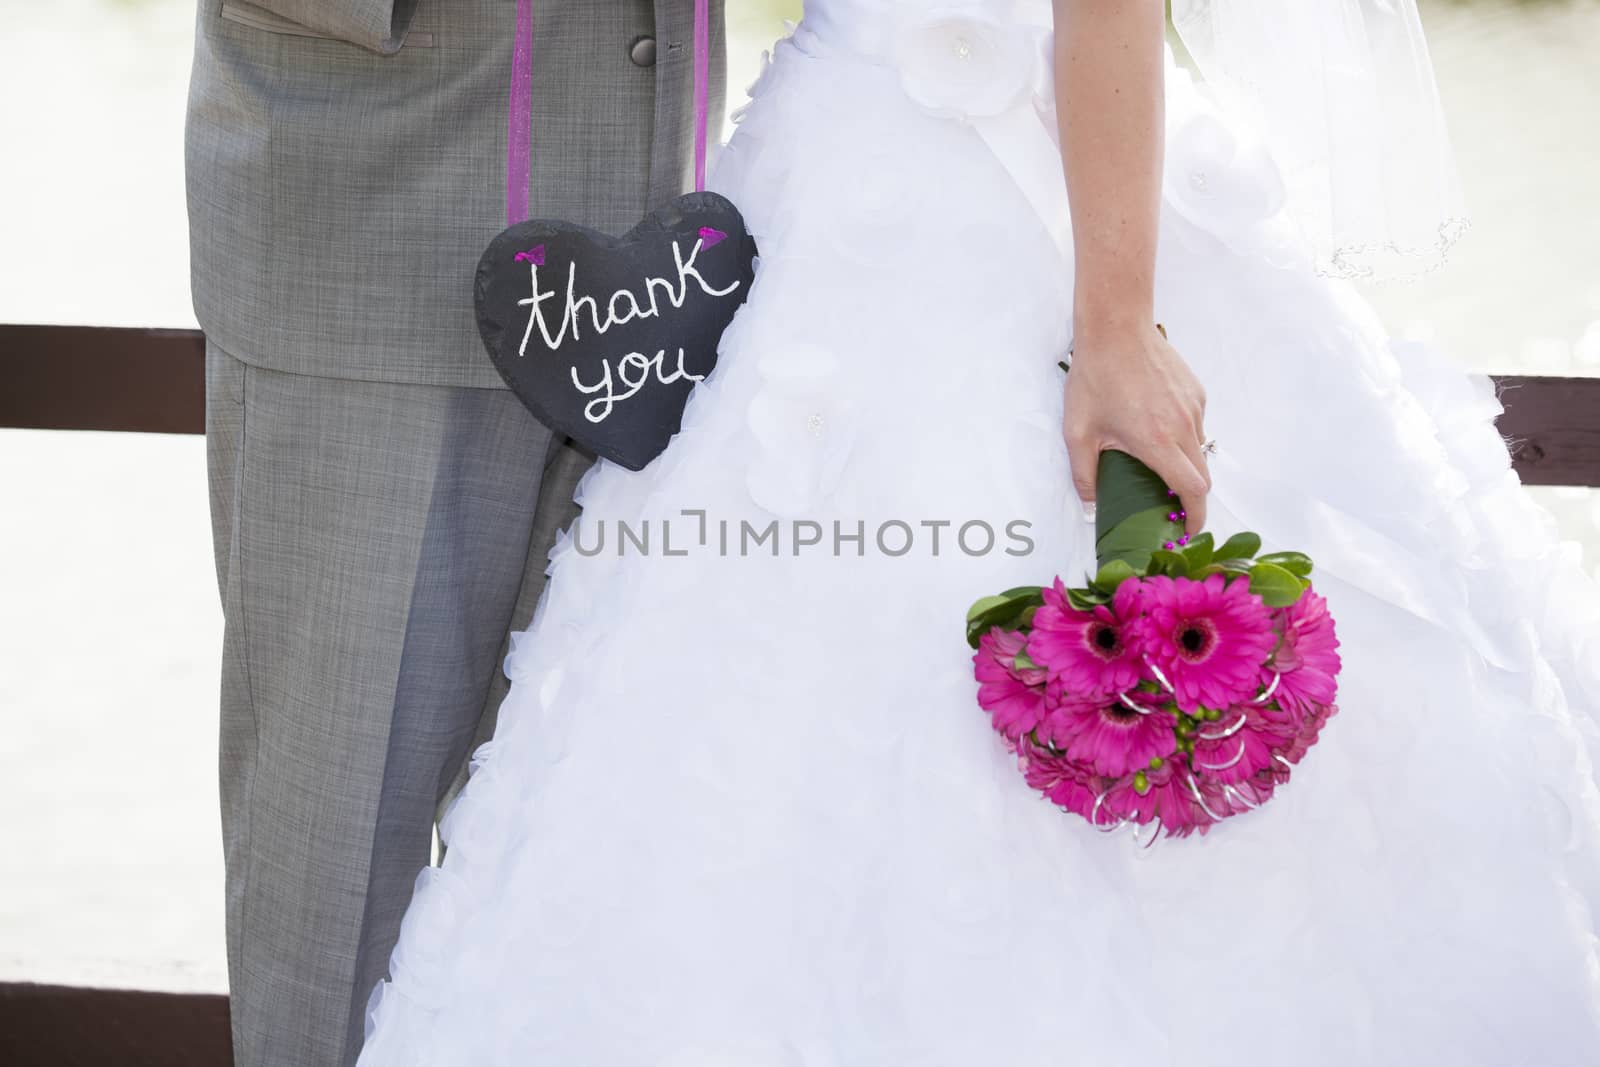 A bride and groom holding a heart shaped thank-you sign.